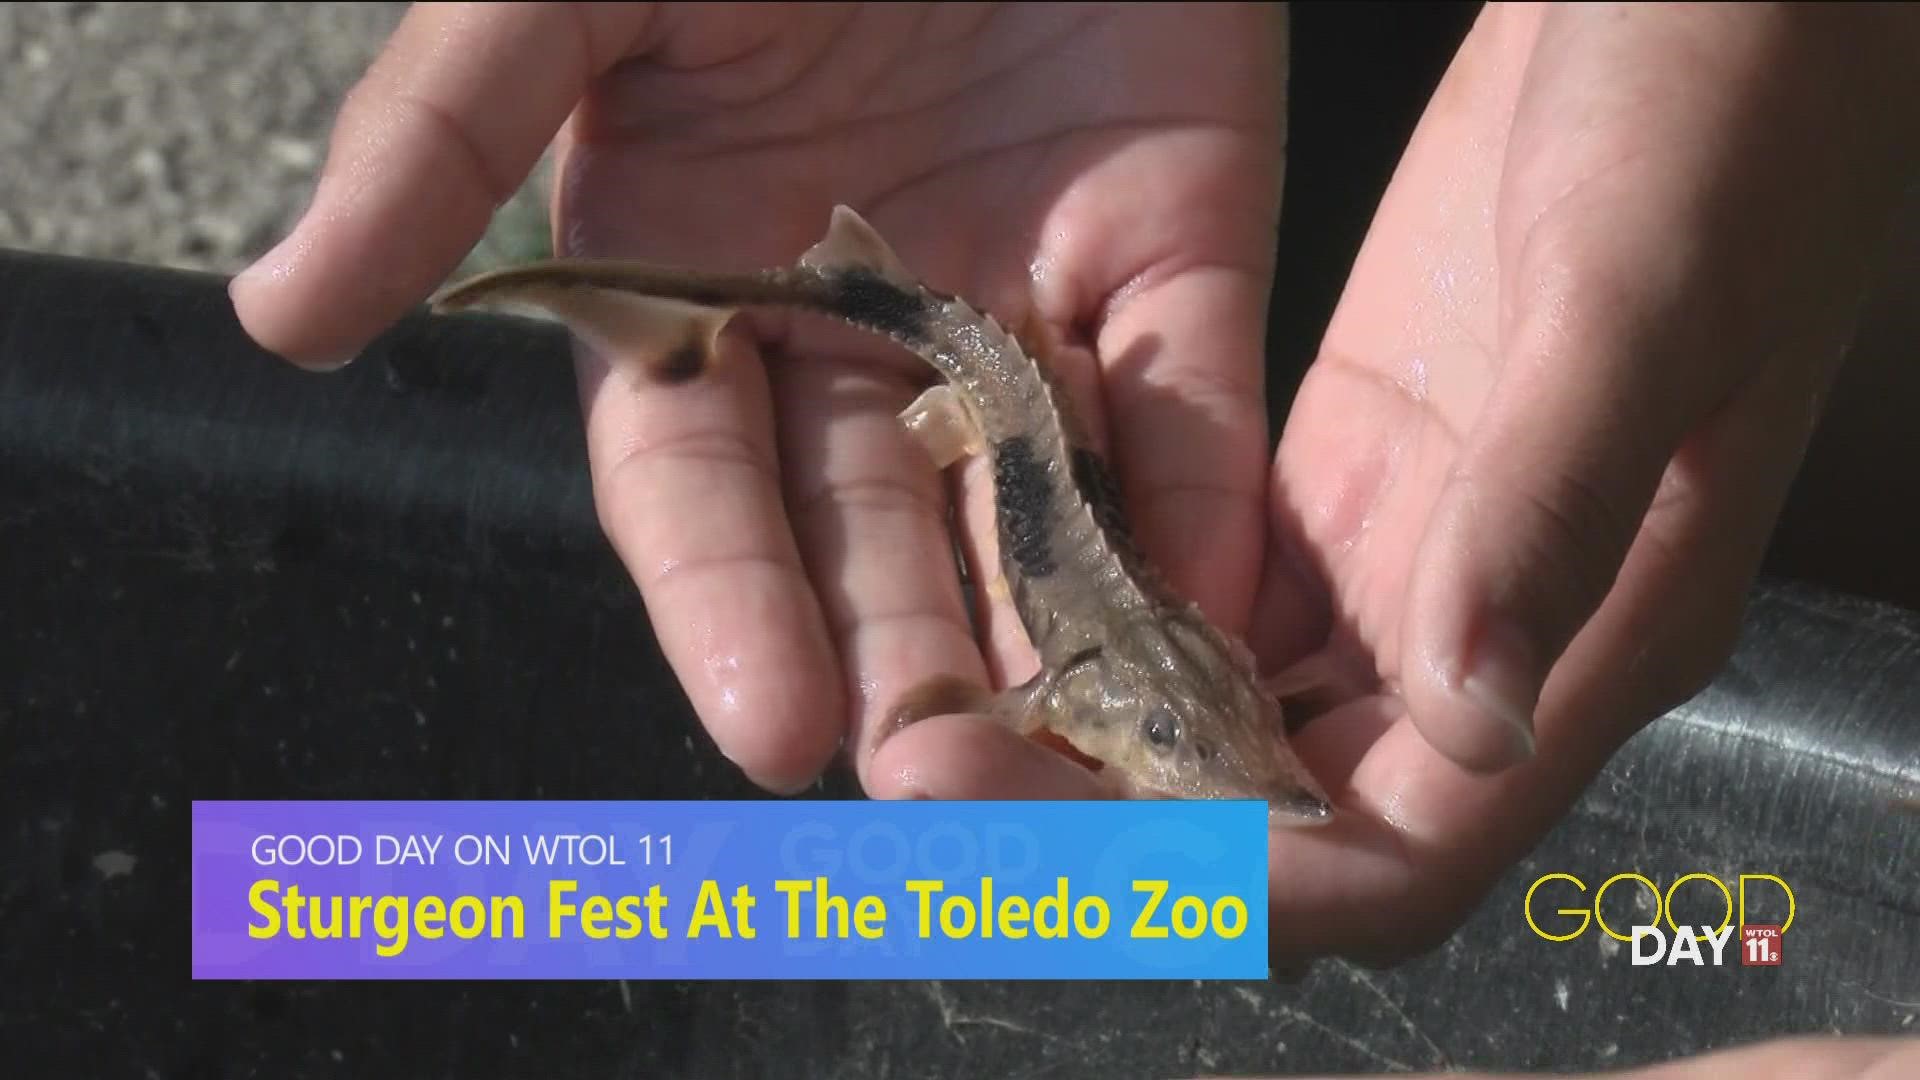 The Toledo Zoo is looking for volunteer to help release sturgeon into the Maumee River. Sturgeon are endangered, but crucial to the Lake Erie watershed ecosystem.